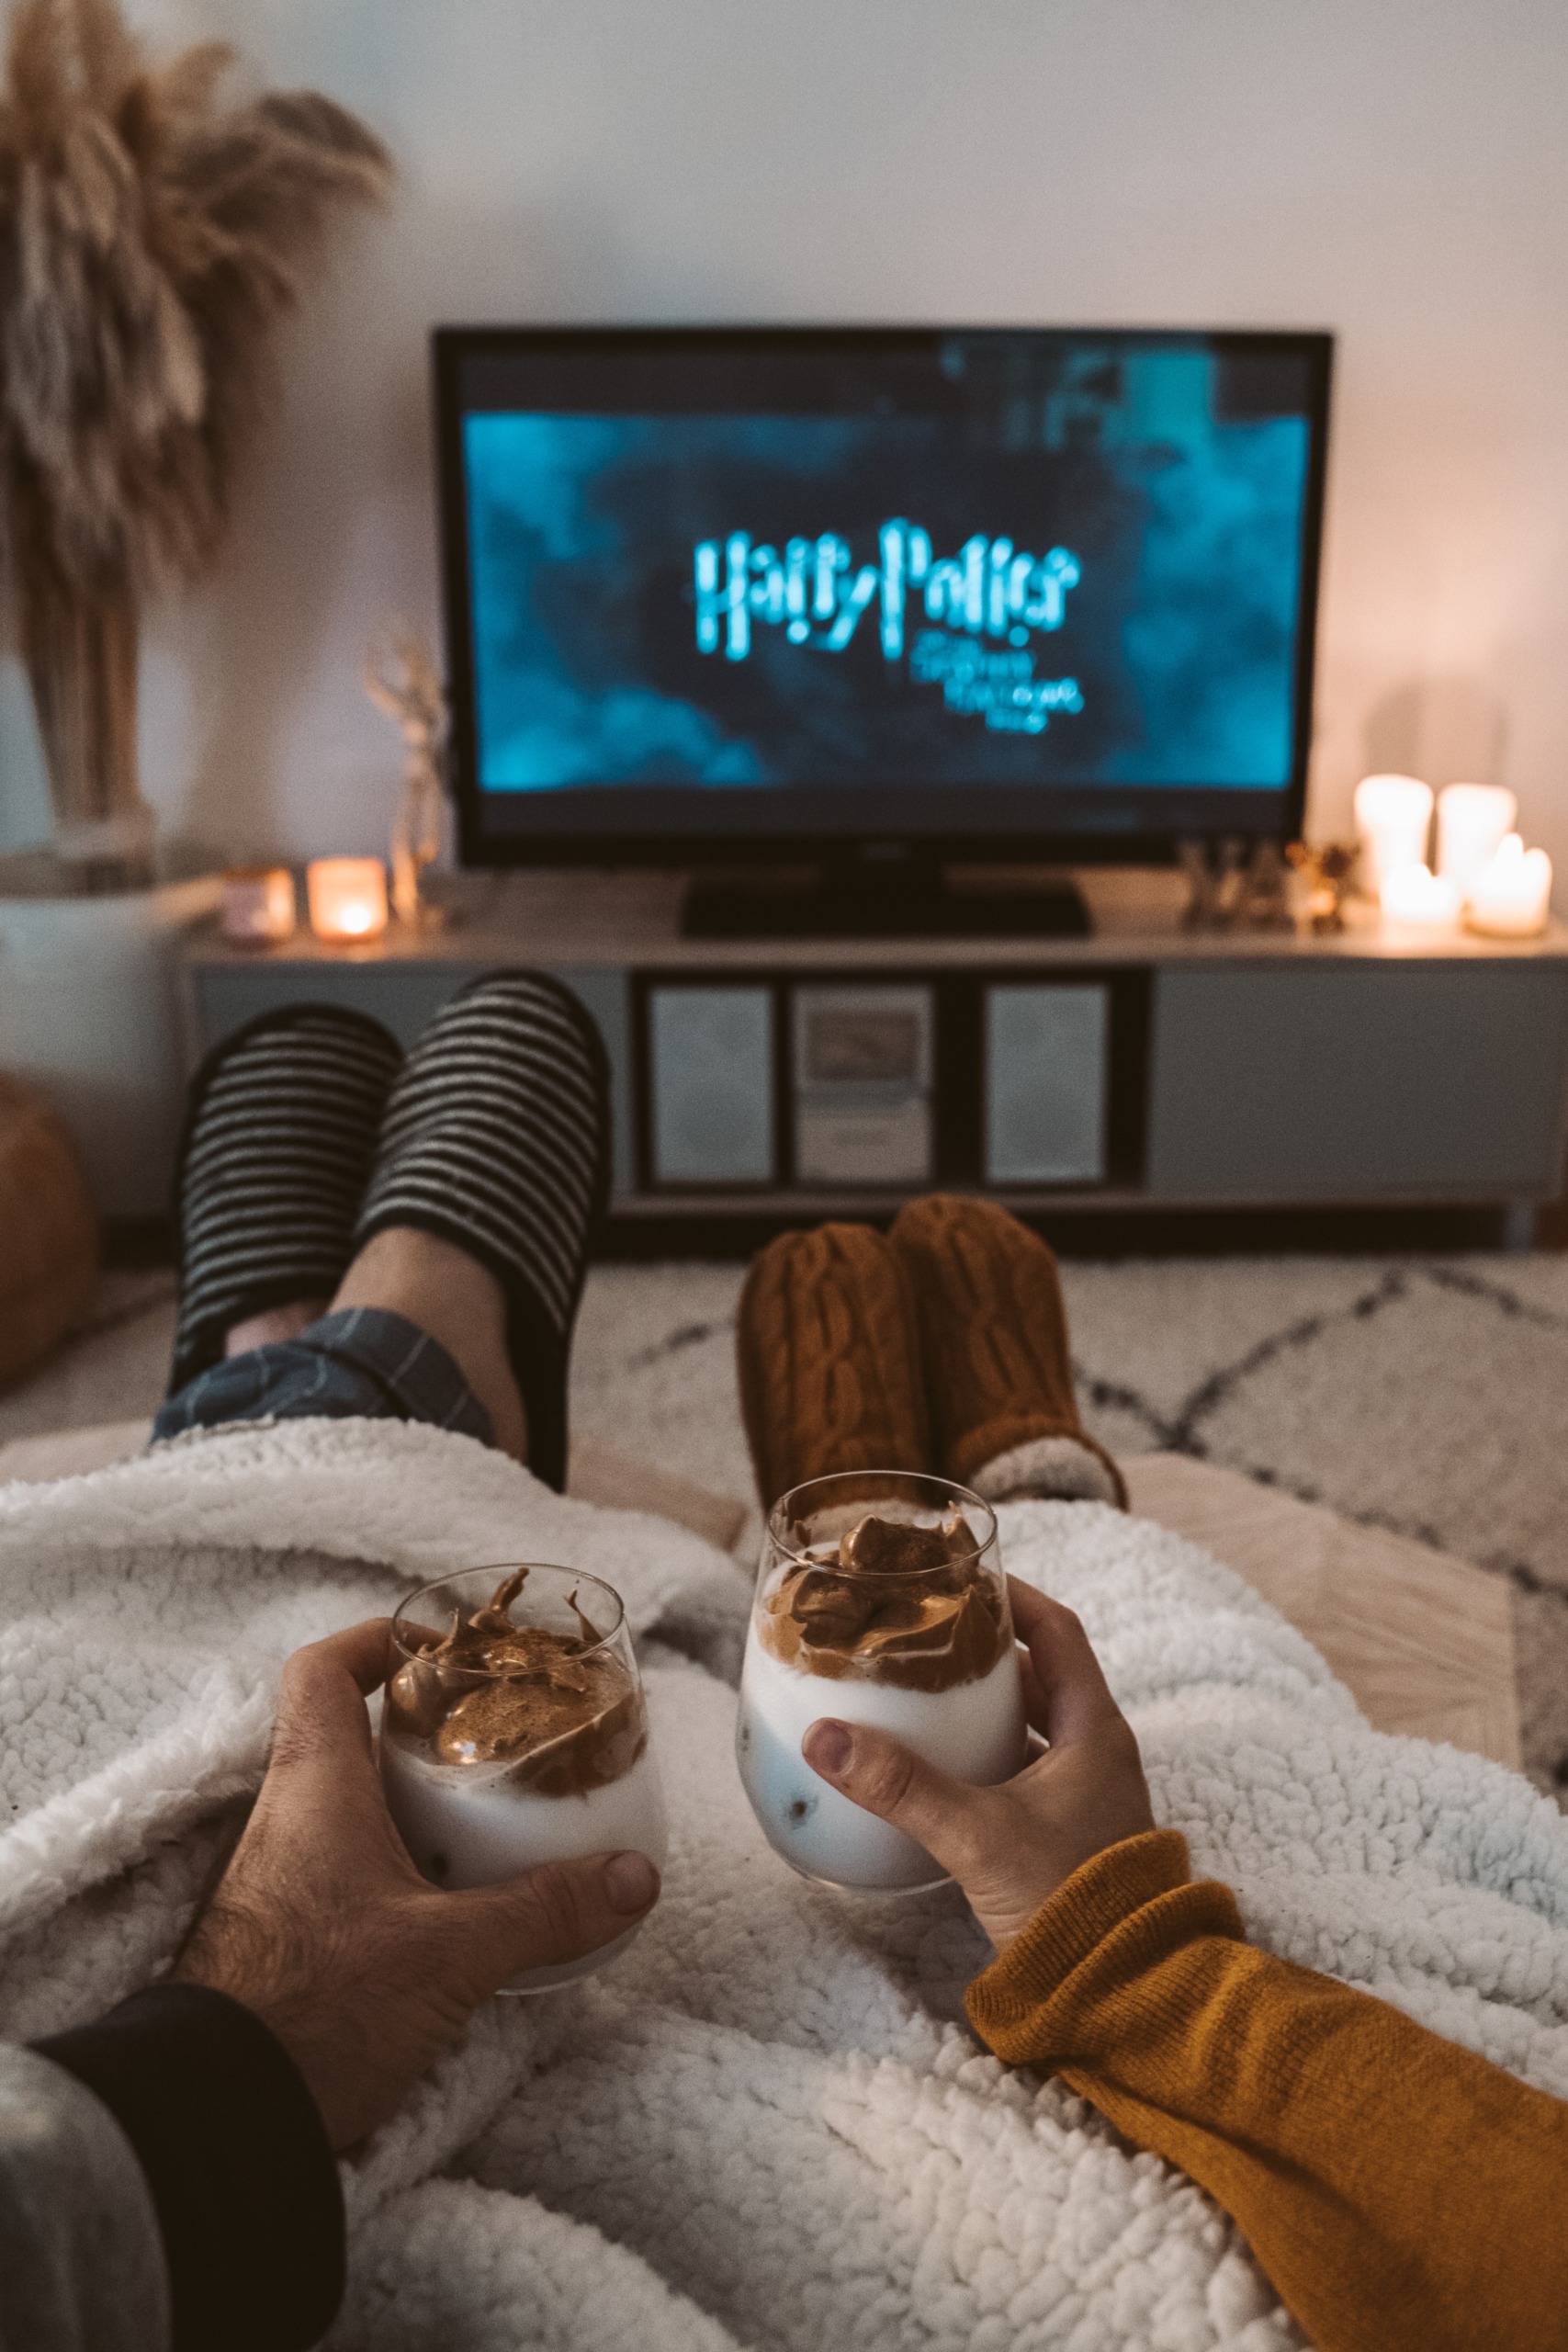 Couple watching Harry Potter